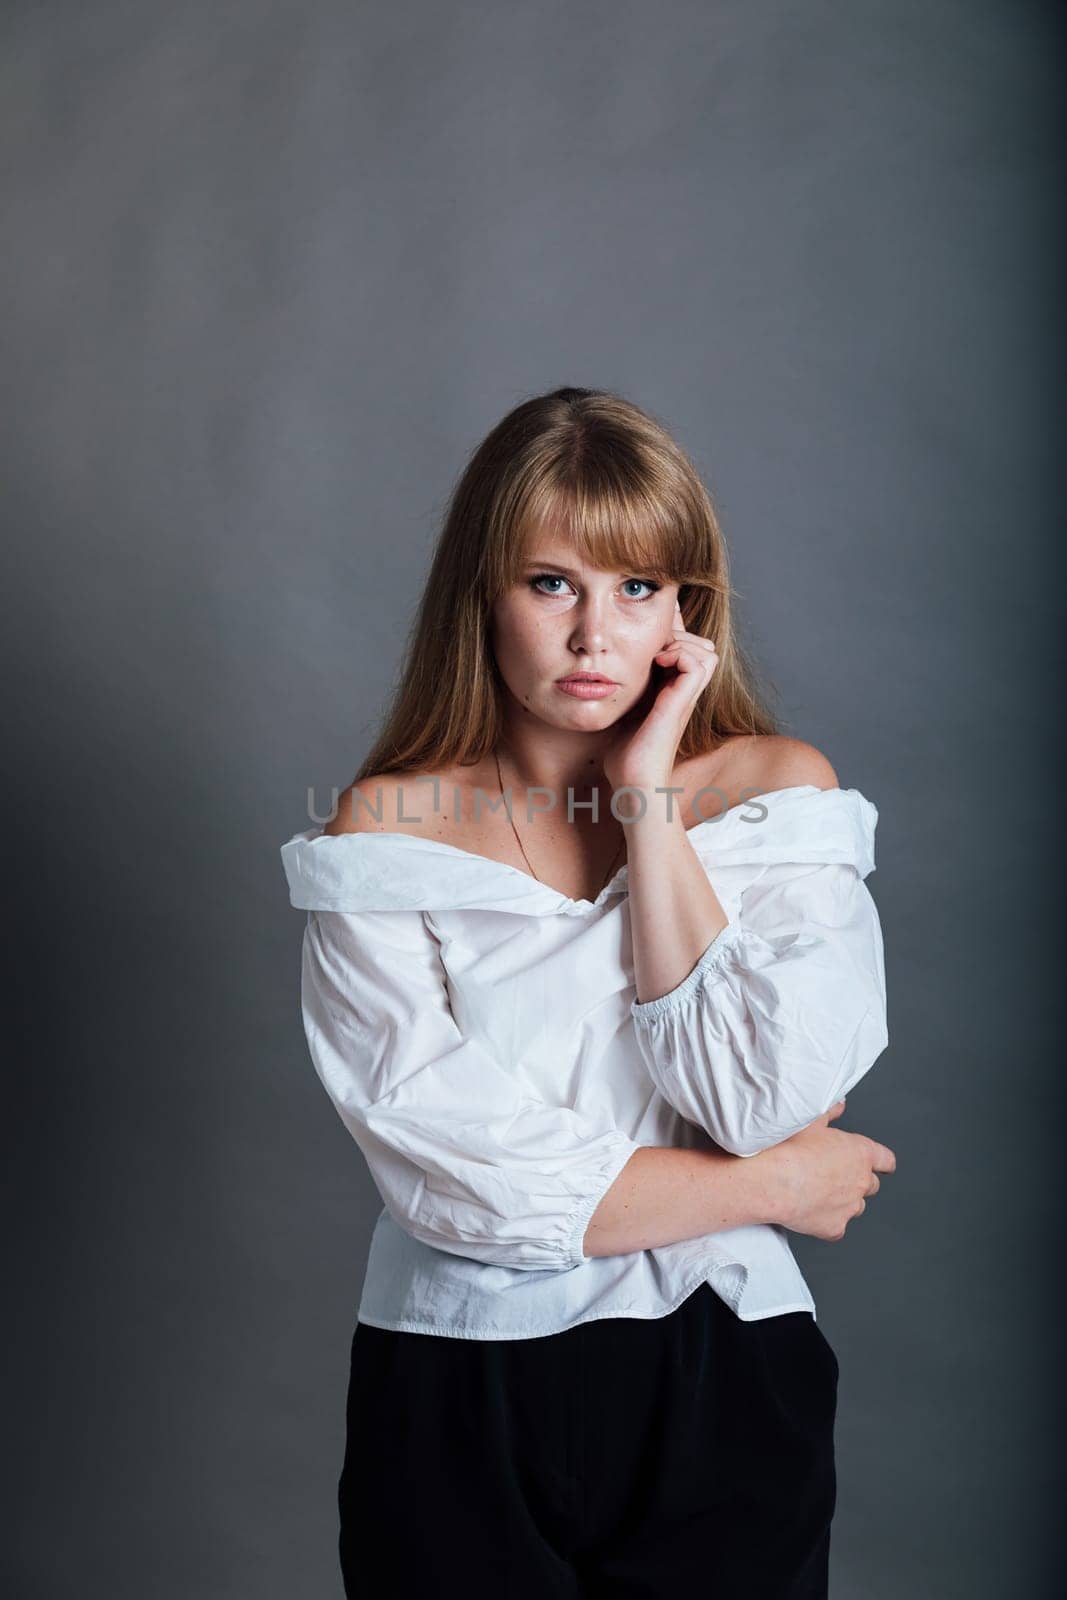 a business fashion woman poses on a dark background